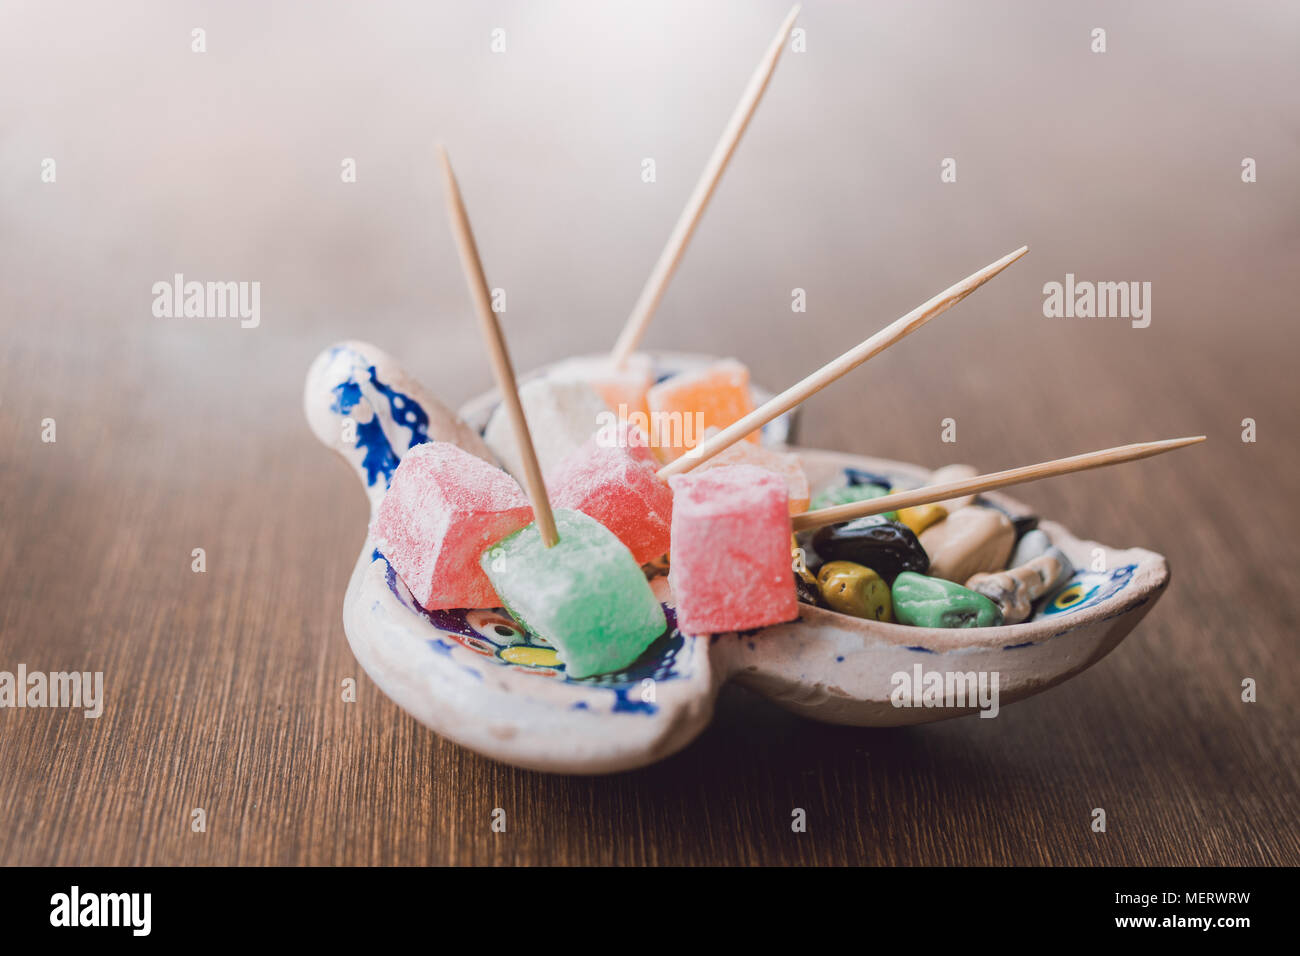 Traditional sweet of Turkey. Delicious Turkish delight. Stock Photo